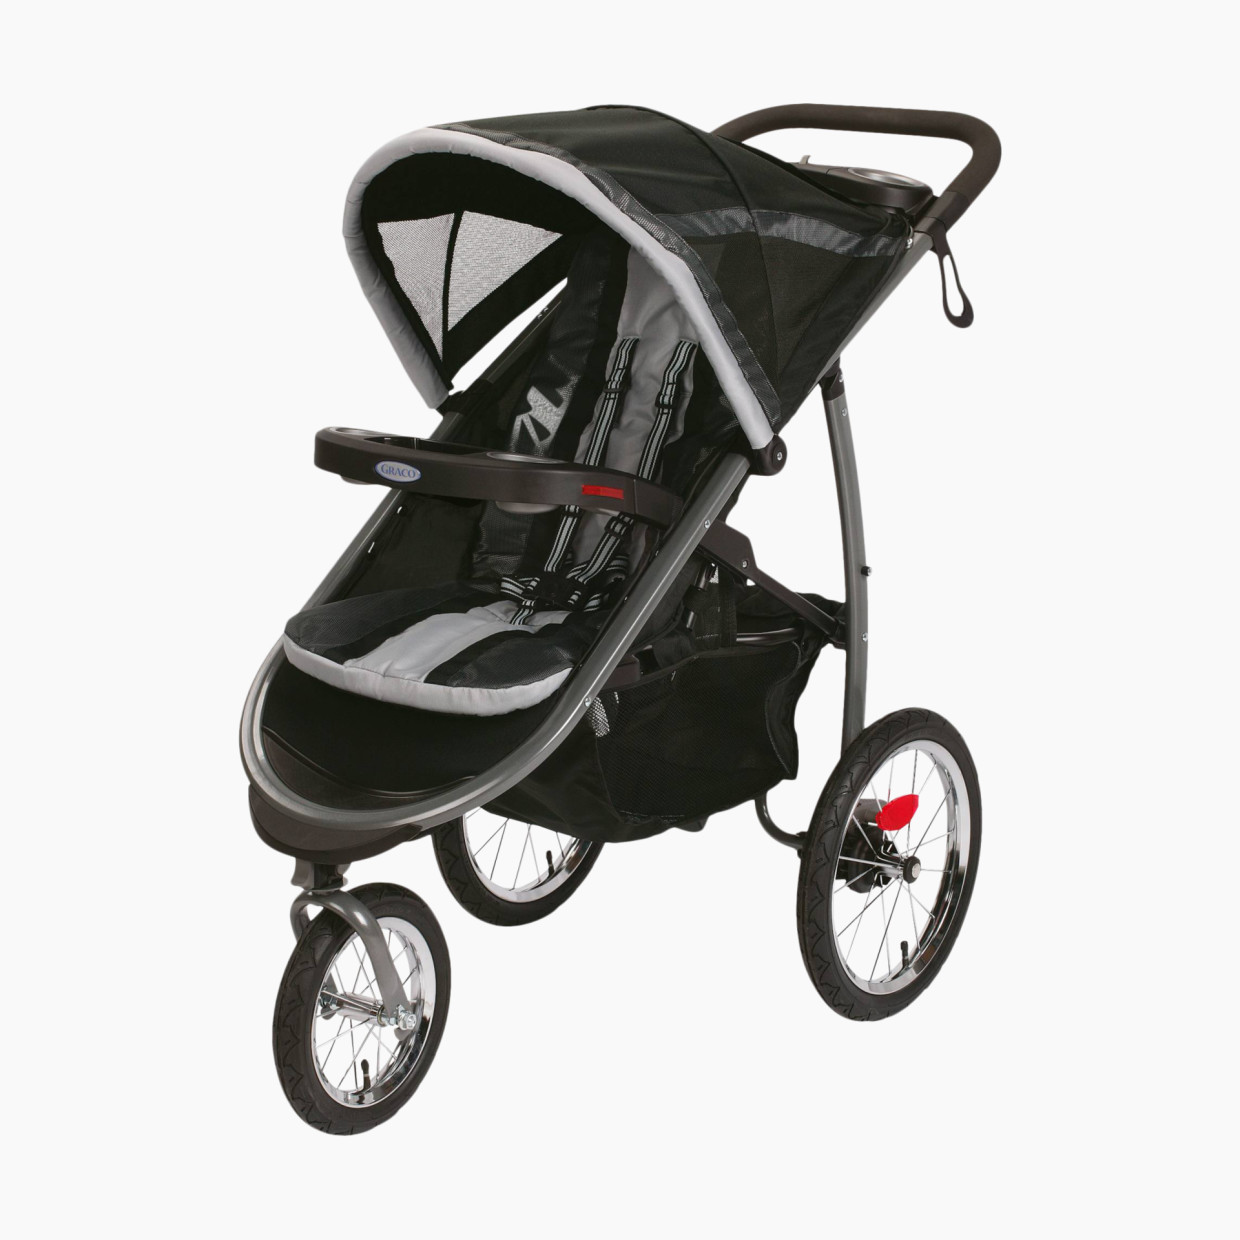 Graco Fastaction Fold Jogger Click Connect Stroller - Gotham.